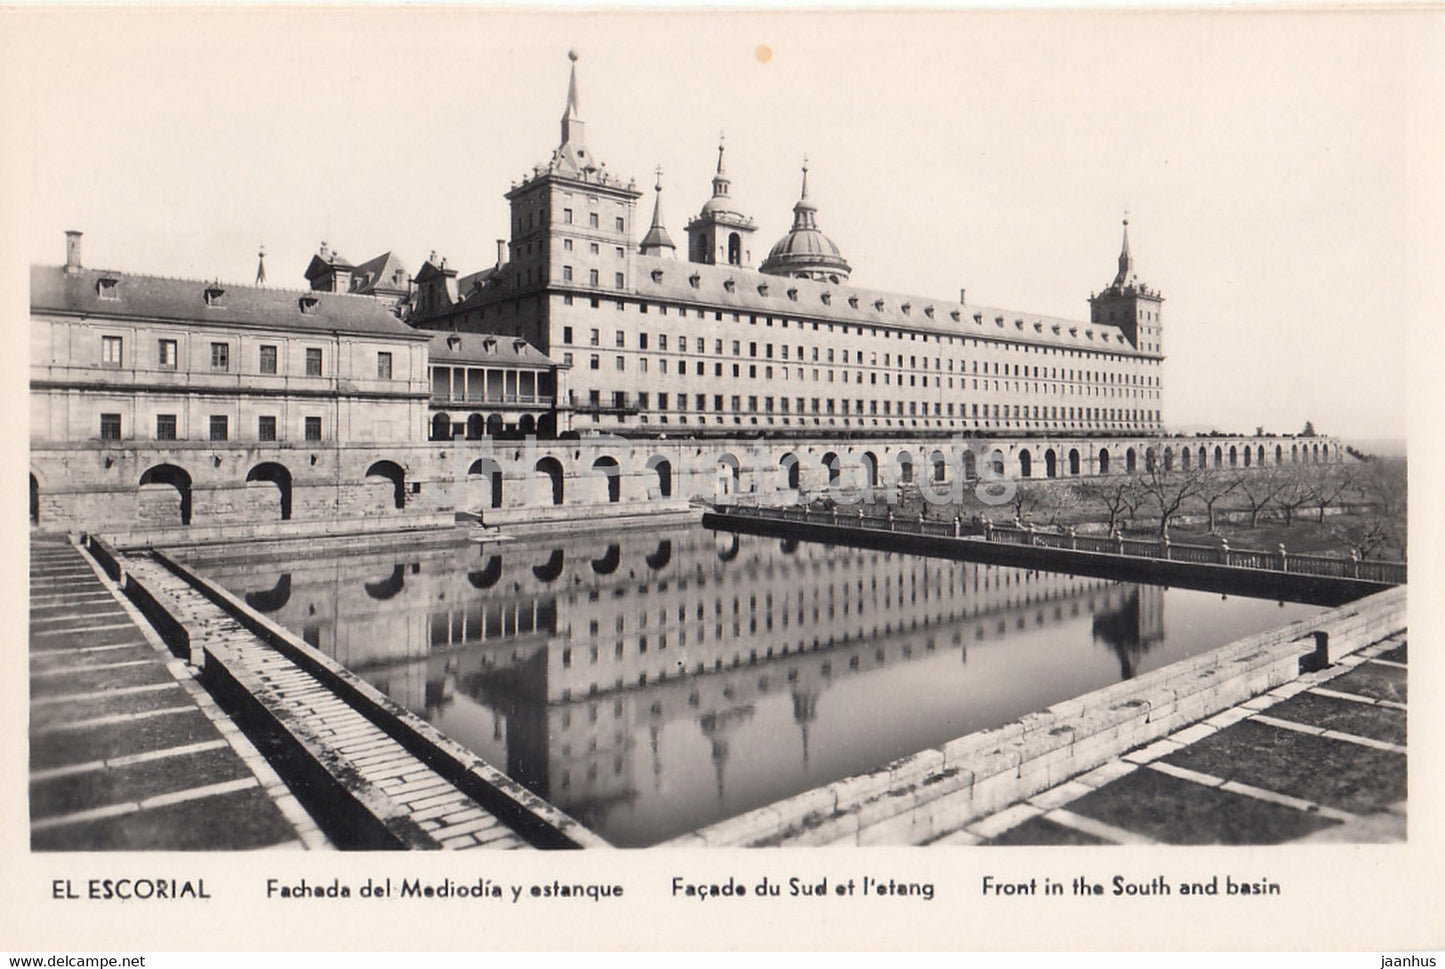 El Escorial - Front in the South and Basin - old postcard - Spain - unused - JH Postcards